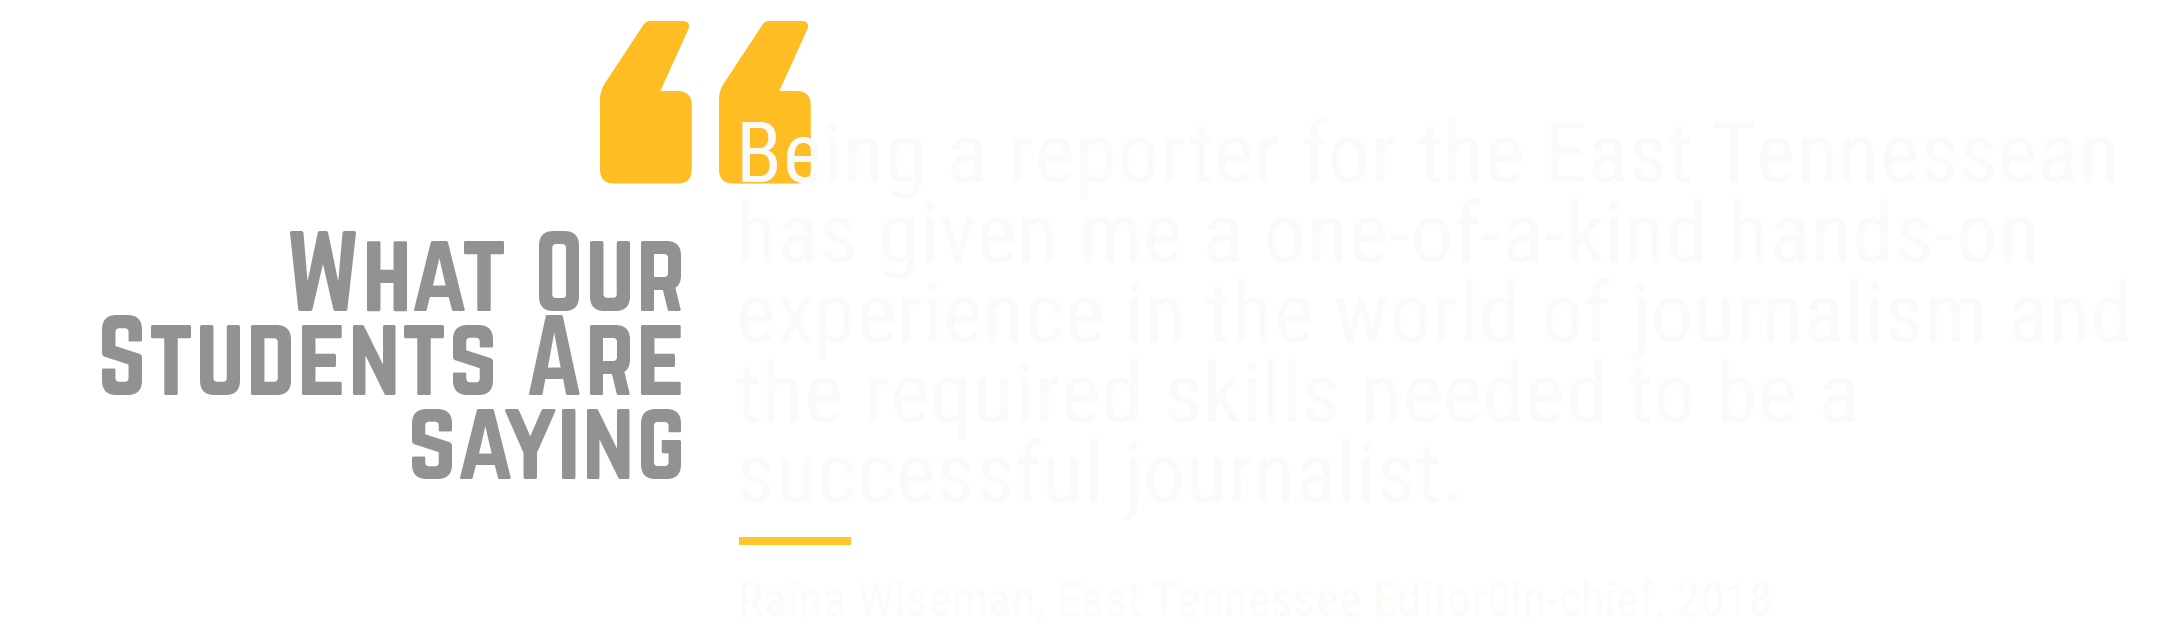 Raina Wiseman, East Tennessee editor-in-chief, 2018 quote.